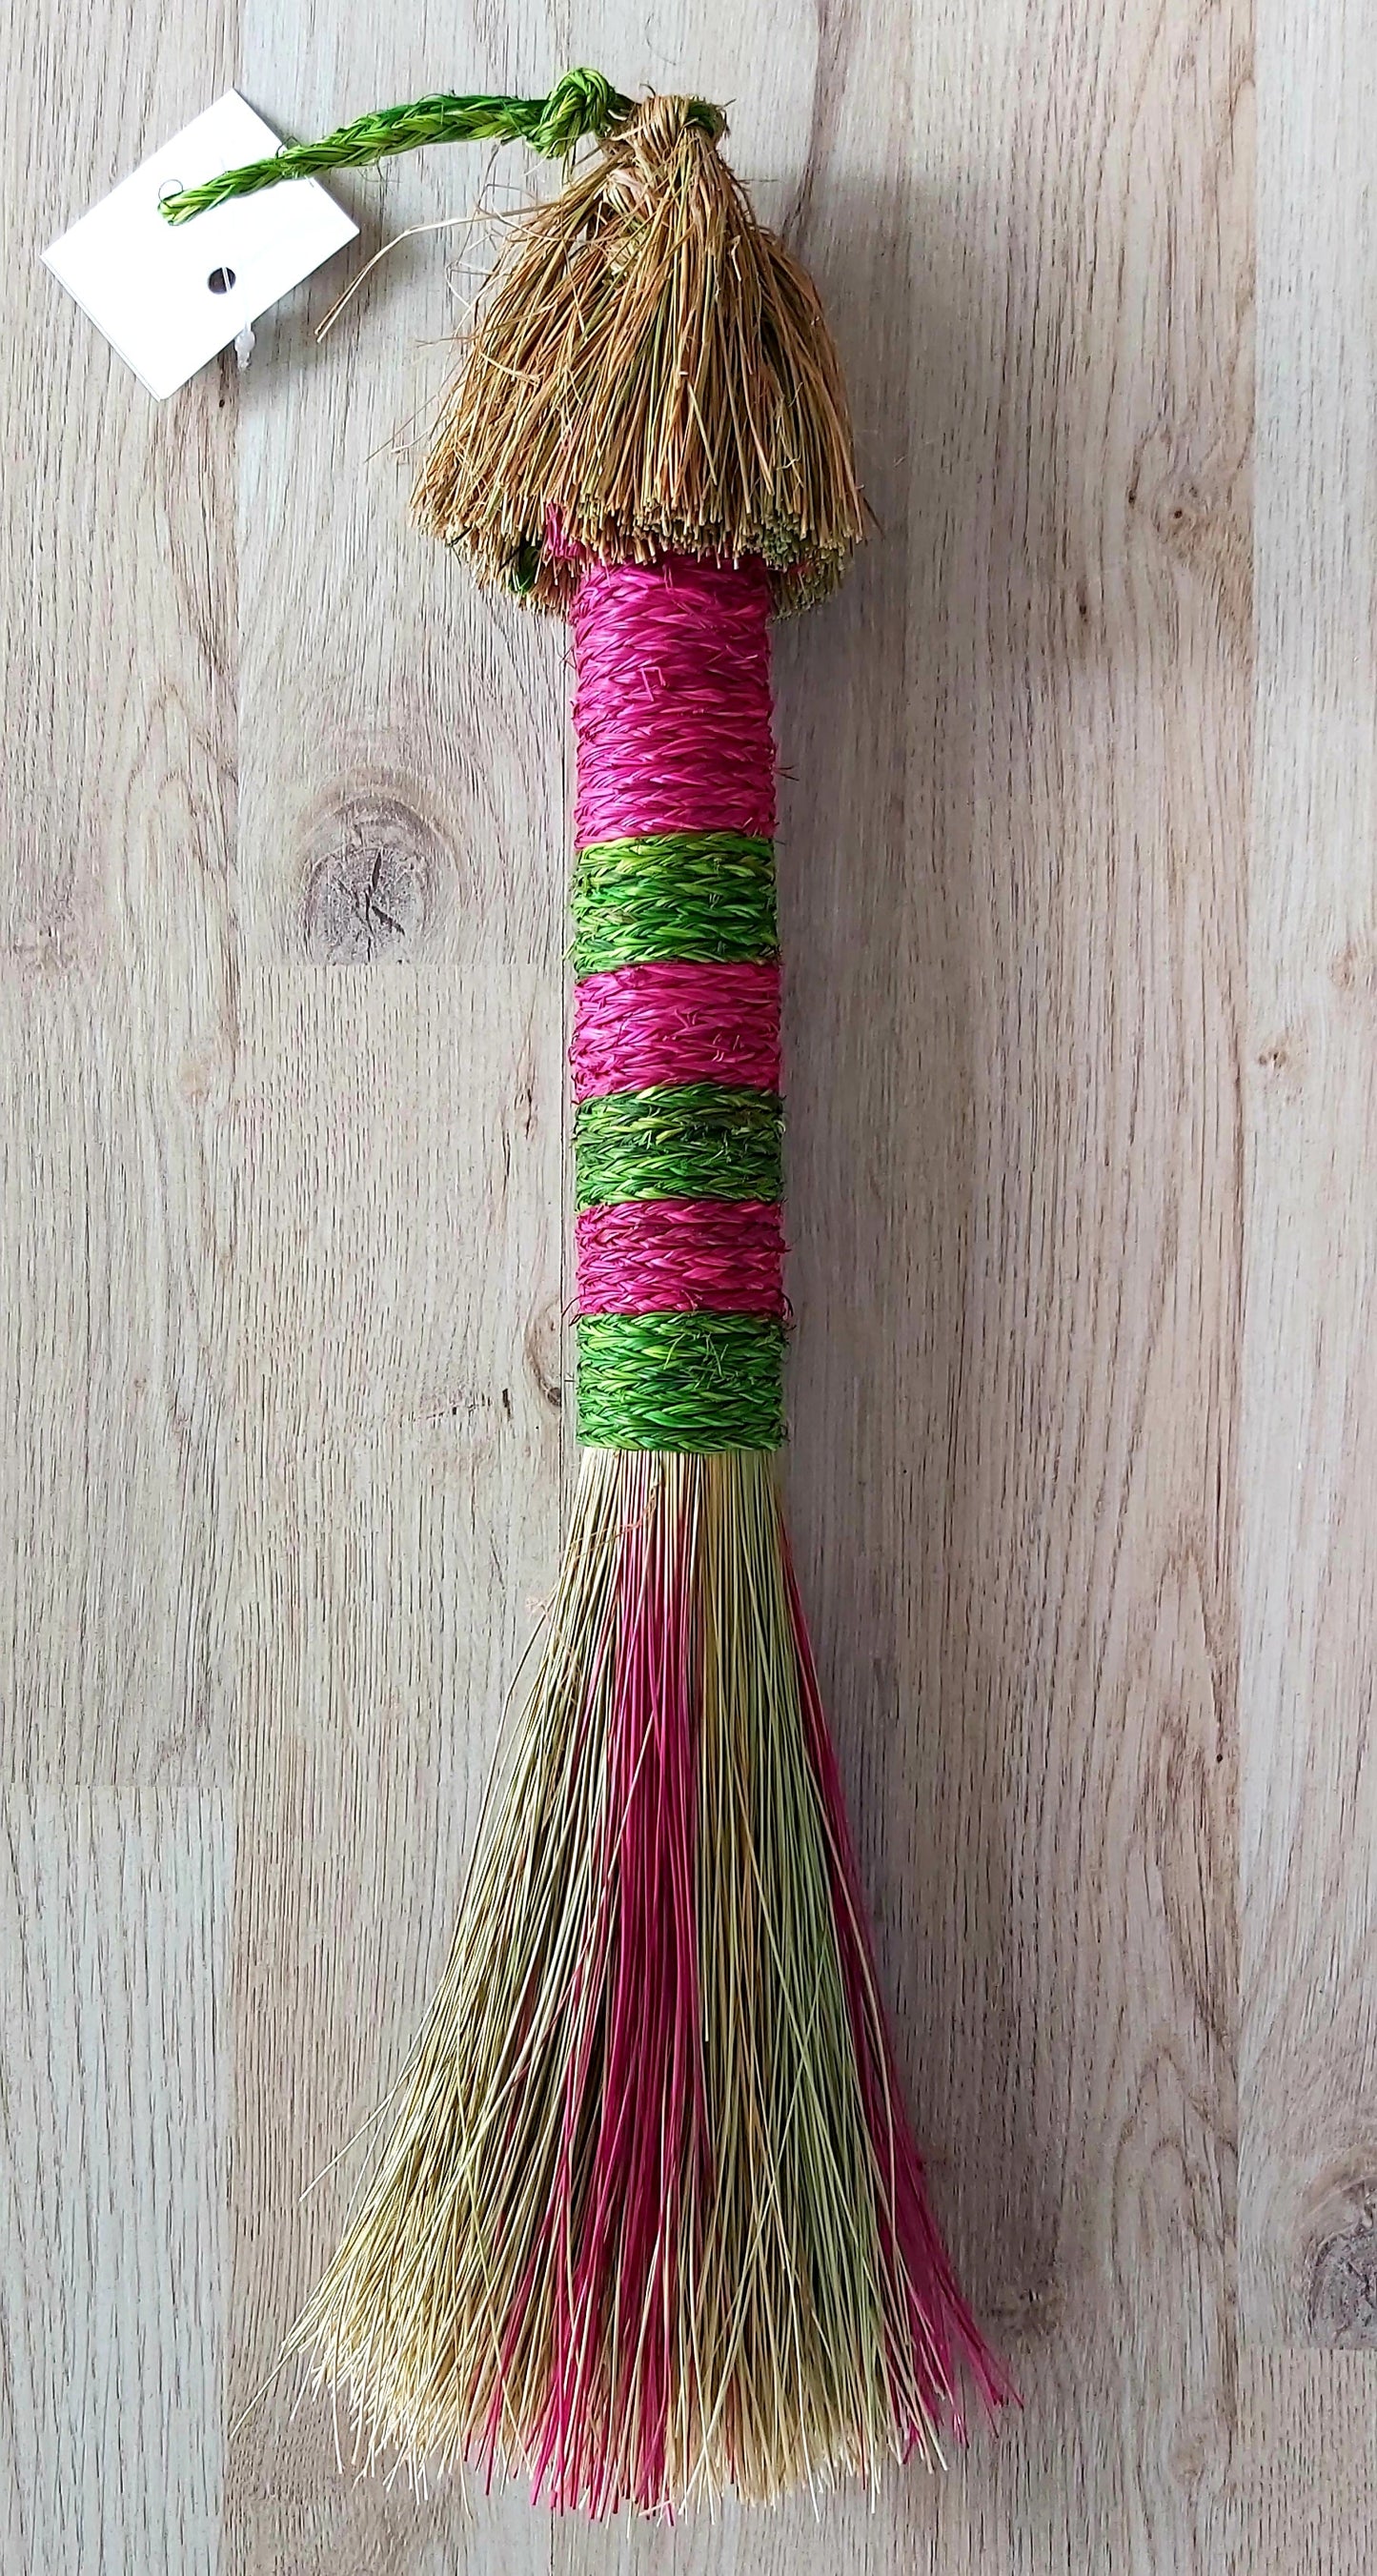 Traditional African Broom